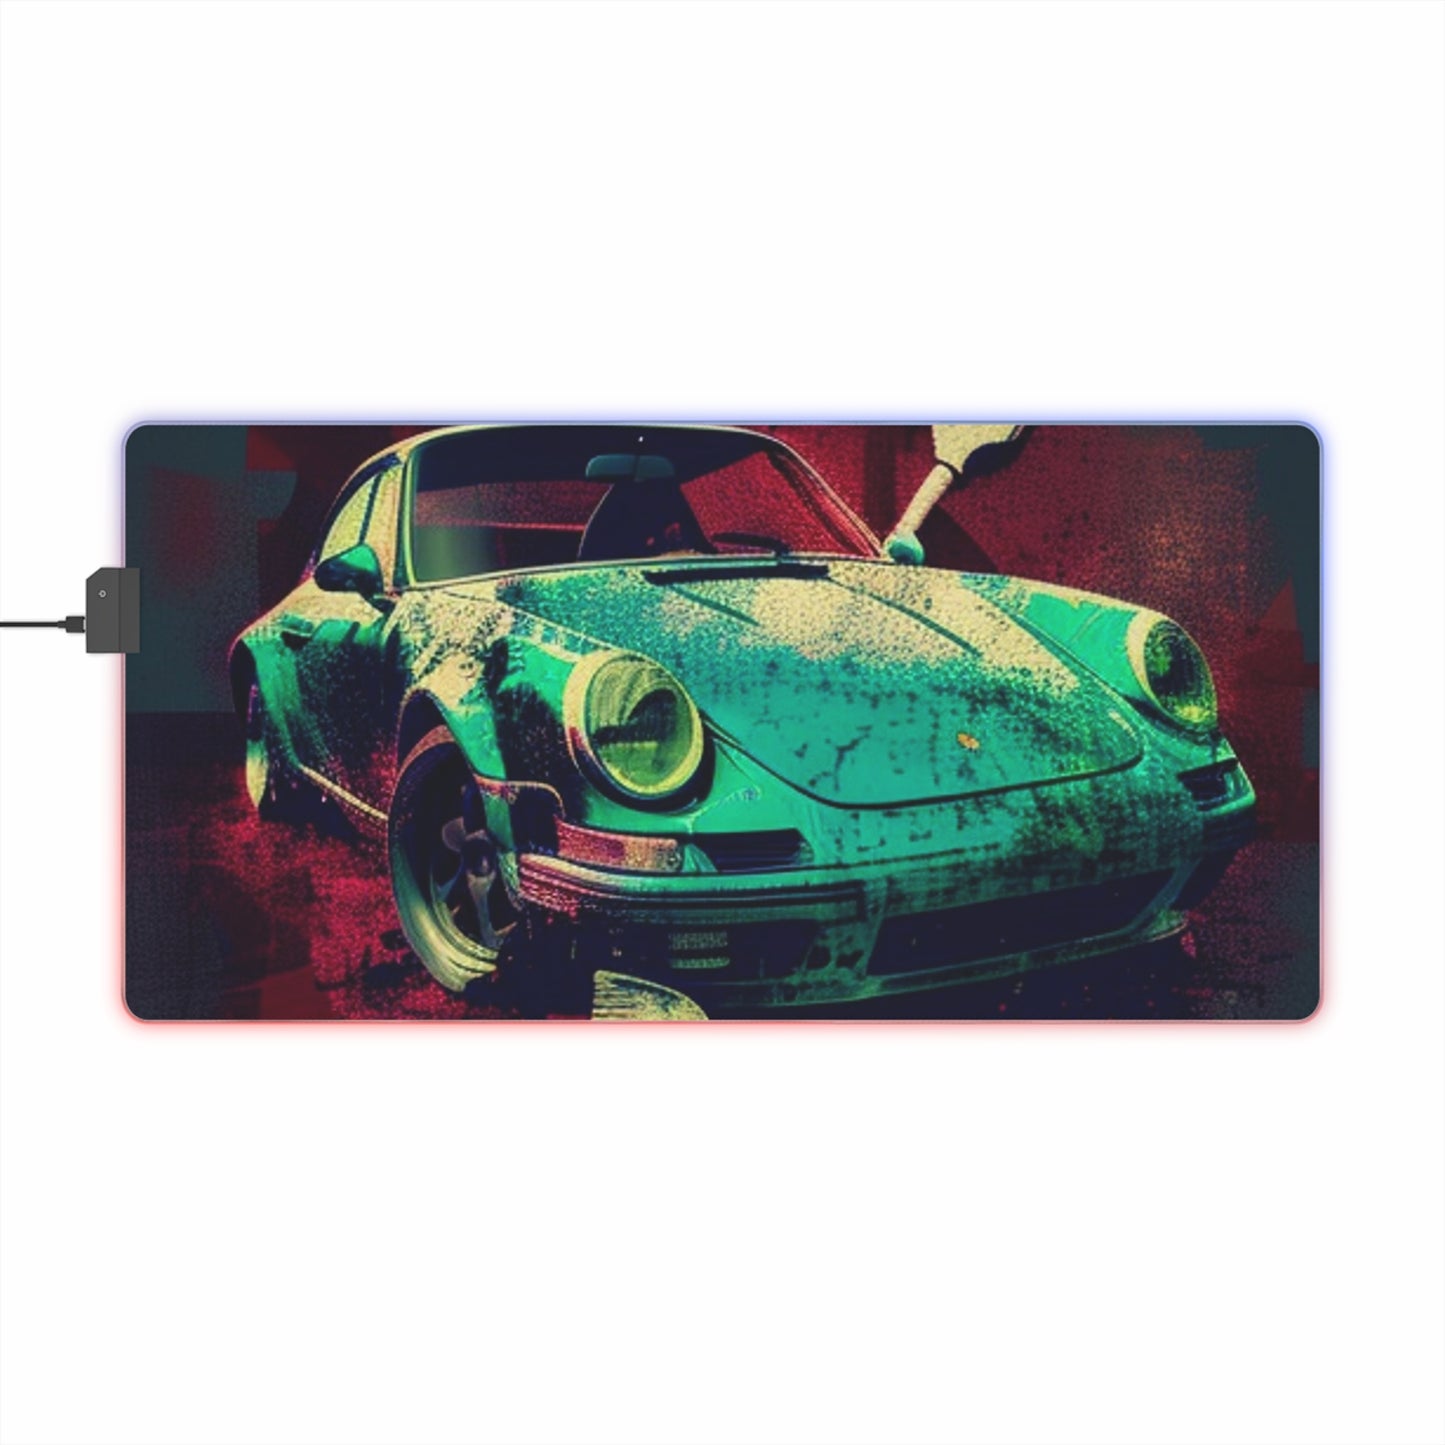 LED Gaming Mouse Pad Porsche Abstract 4